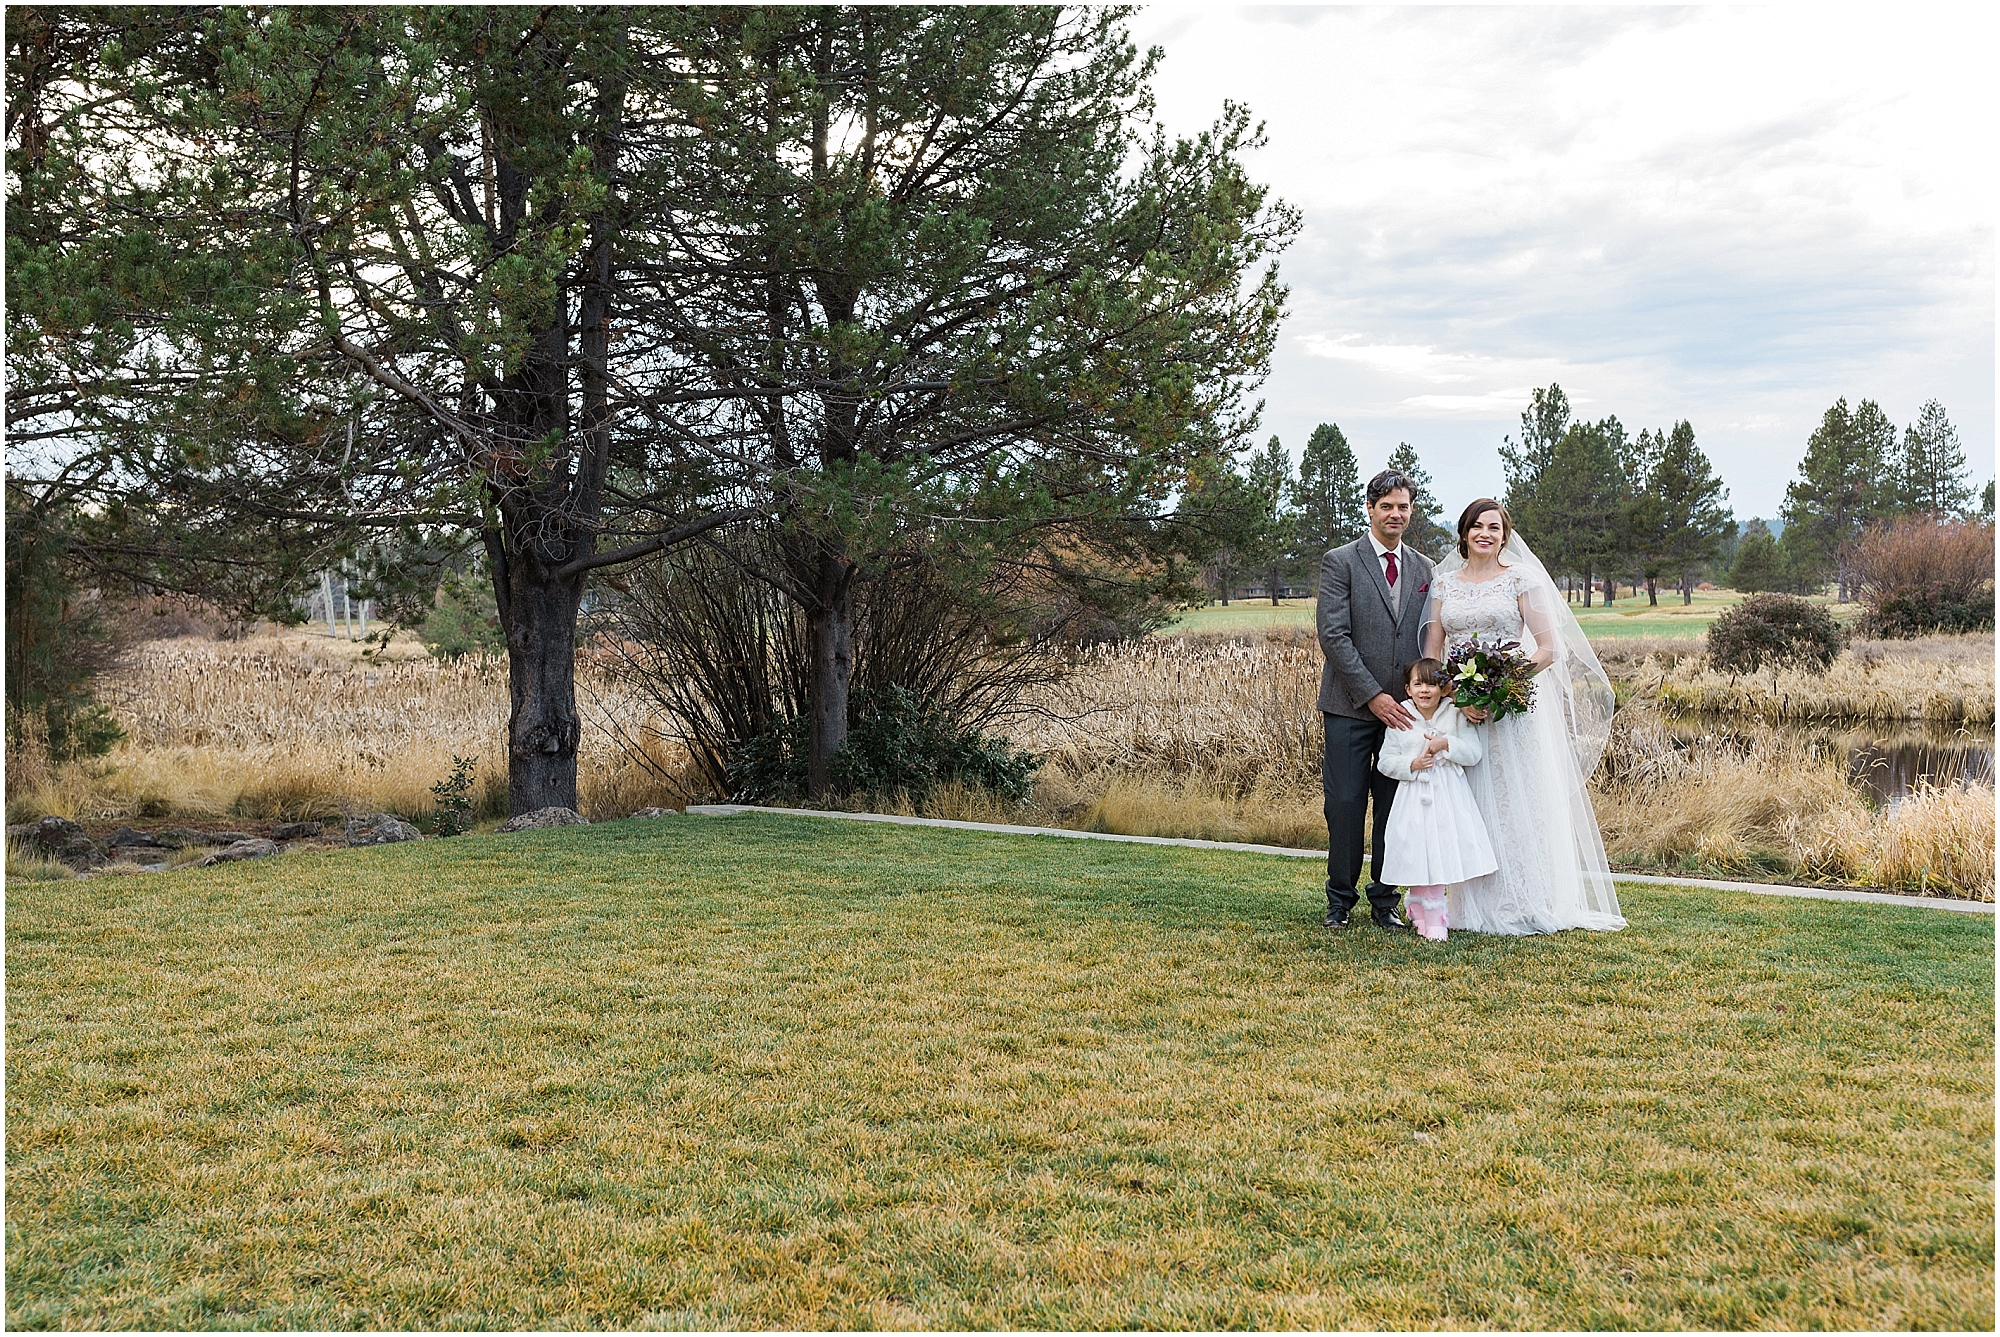 A gorgeous family portrait on this couple's wedding day at Sunriver Resort in Oregon. | Erica Swantek Photography